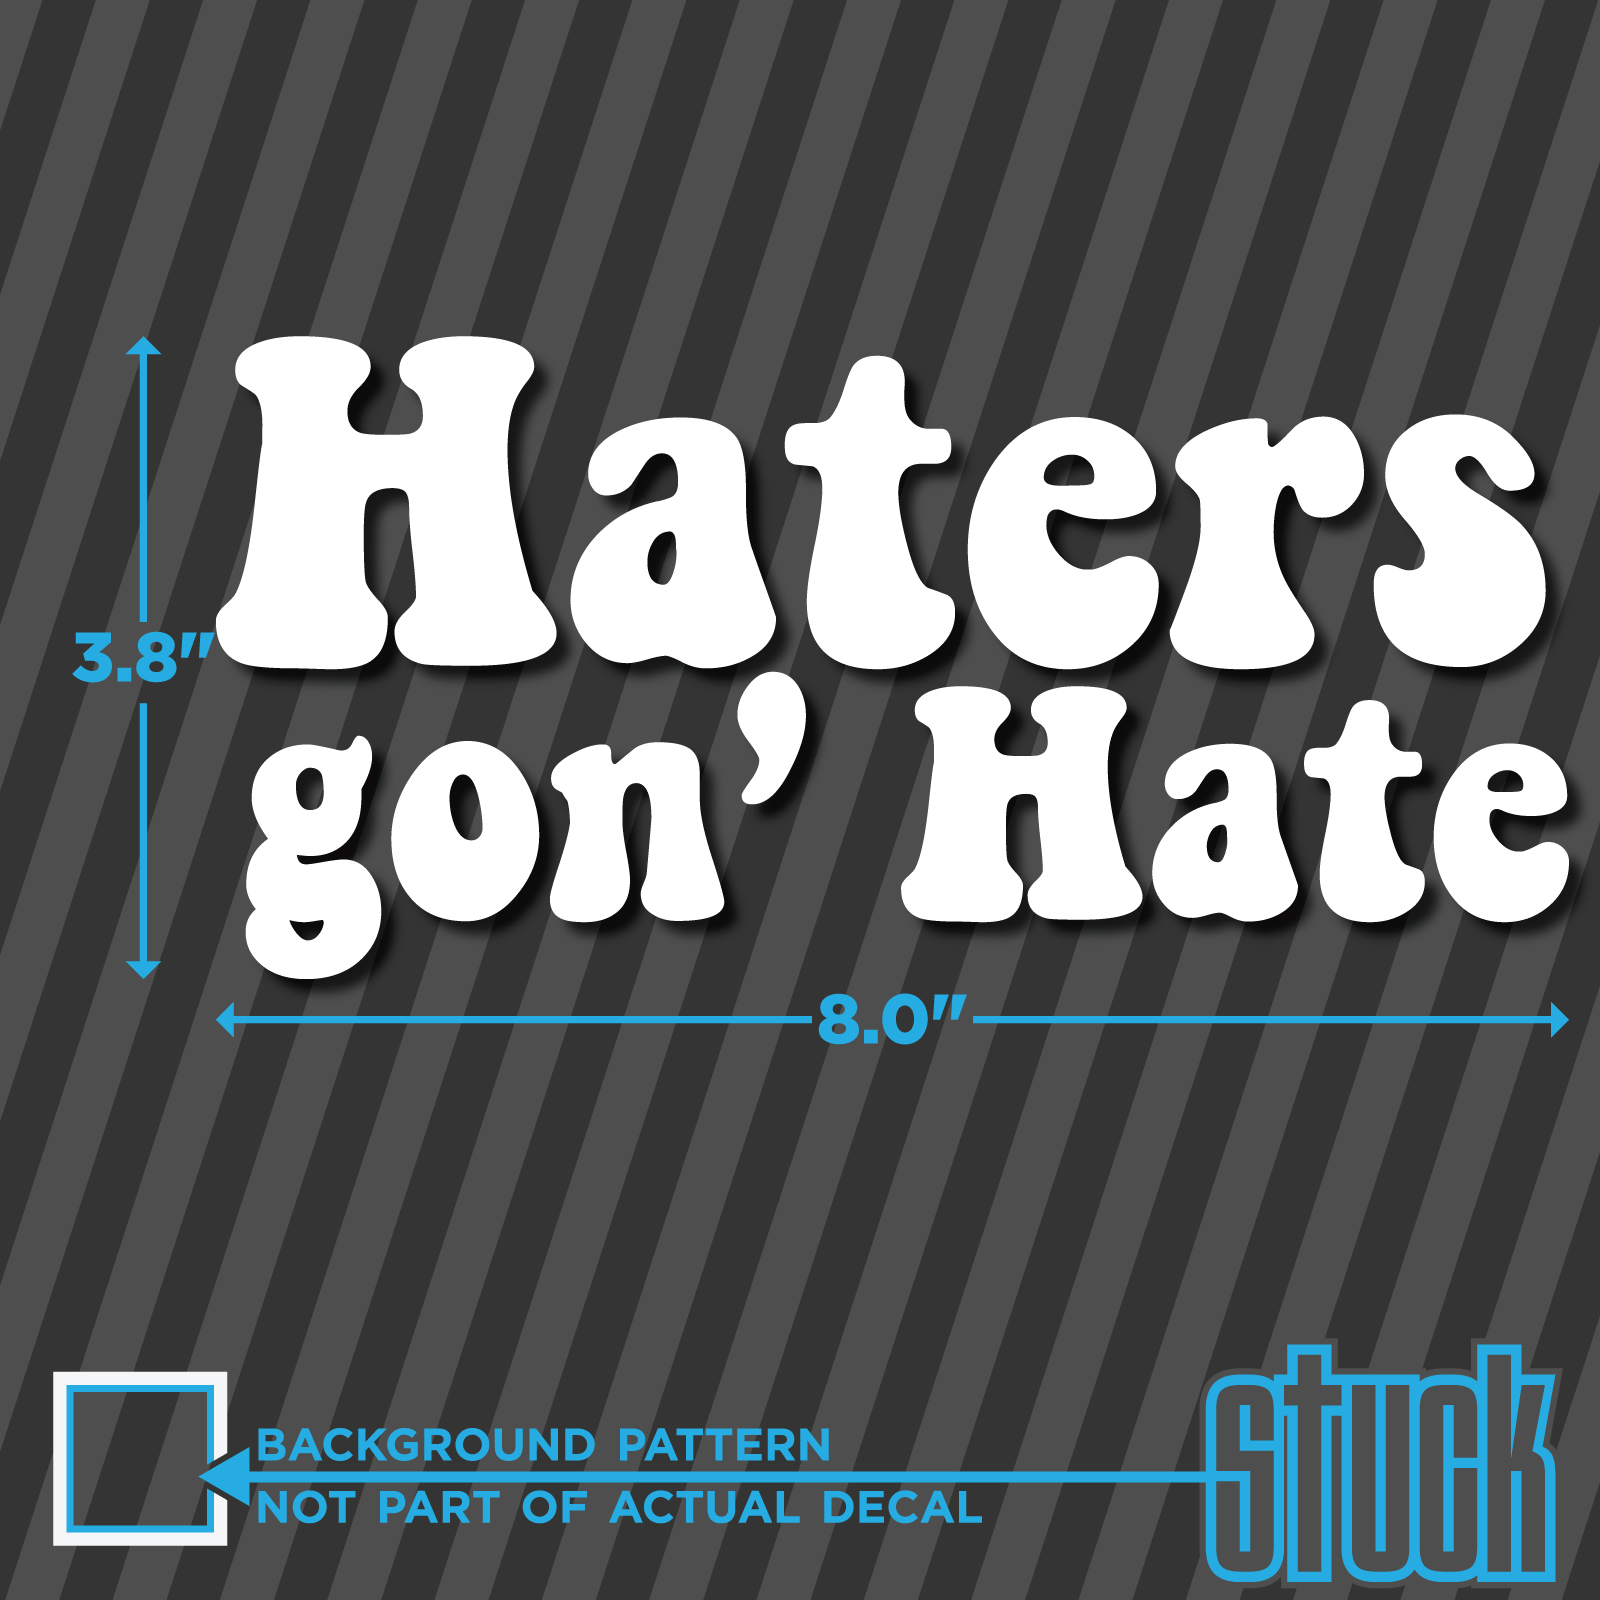 Haters Gonna Hate 8 0 X3 8 Vinyl Decal Sticker Hater Gon Ebay